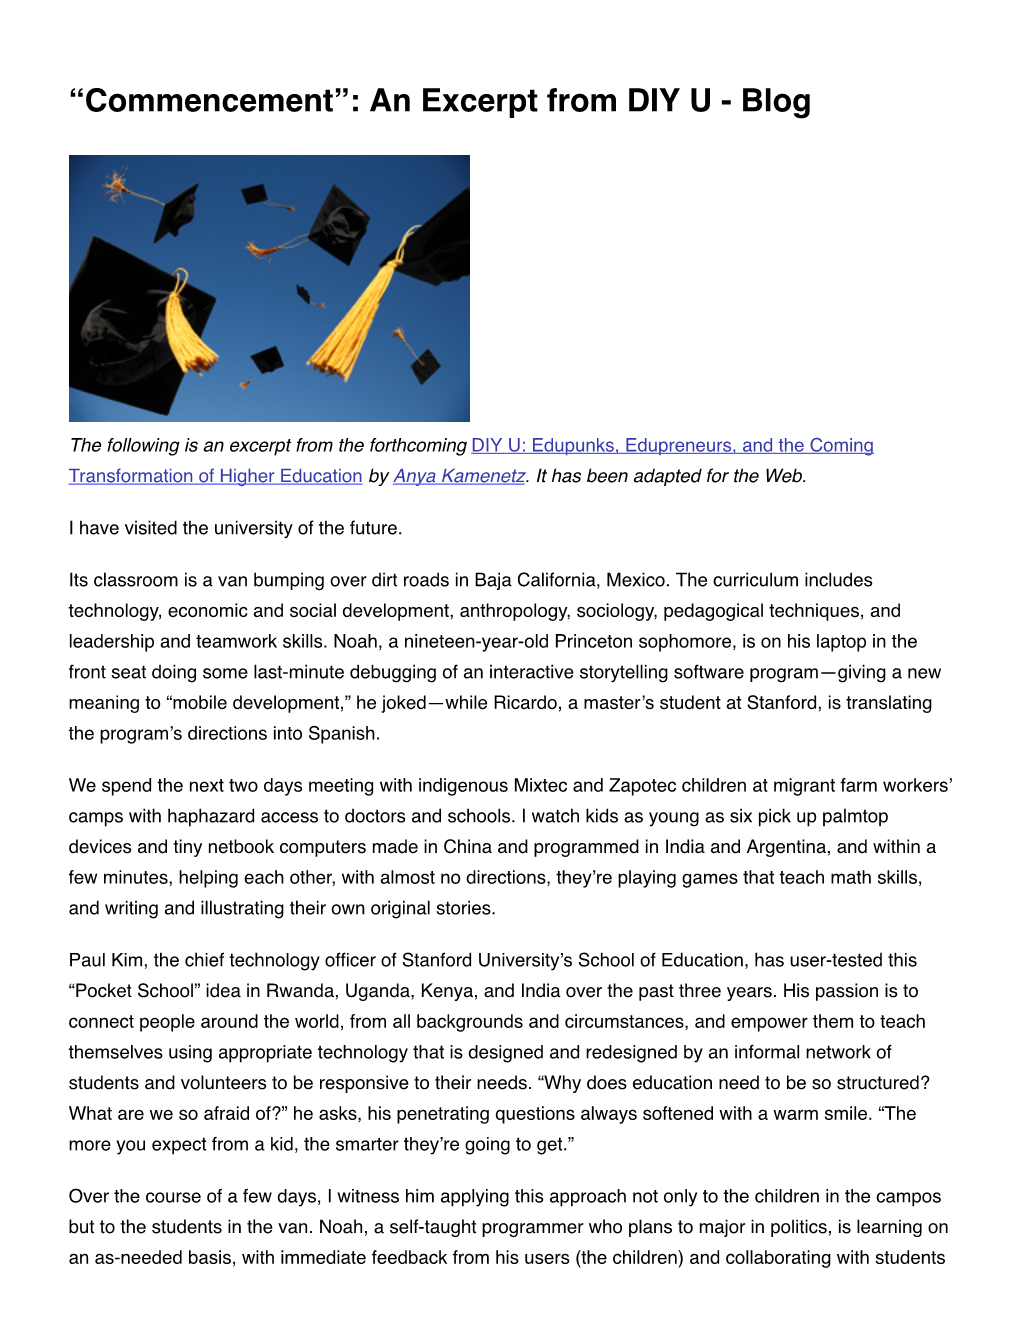 “Commencement”: an Excerpt from DIY U - Blog